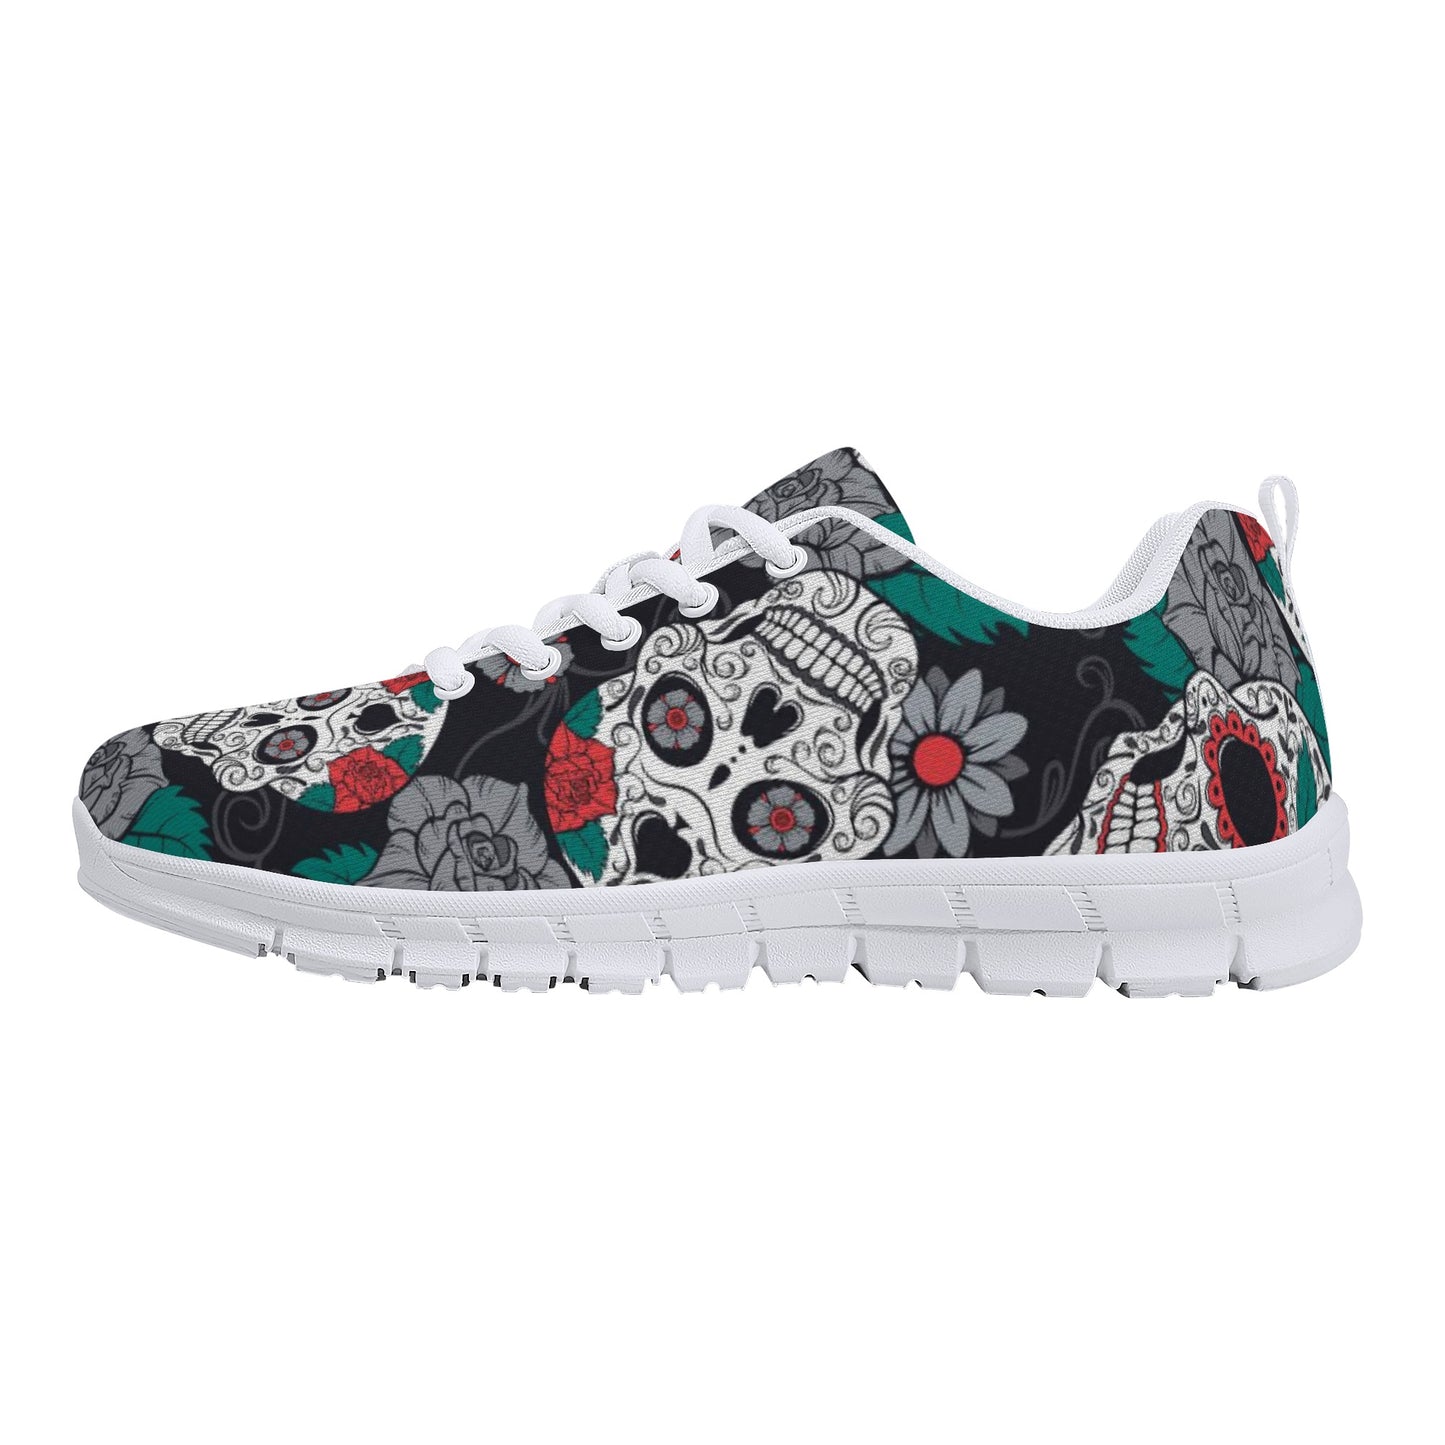 Day of the dead candy skull gothic Women's Running Shoes